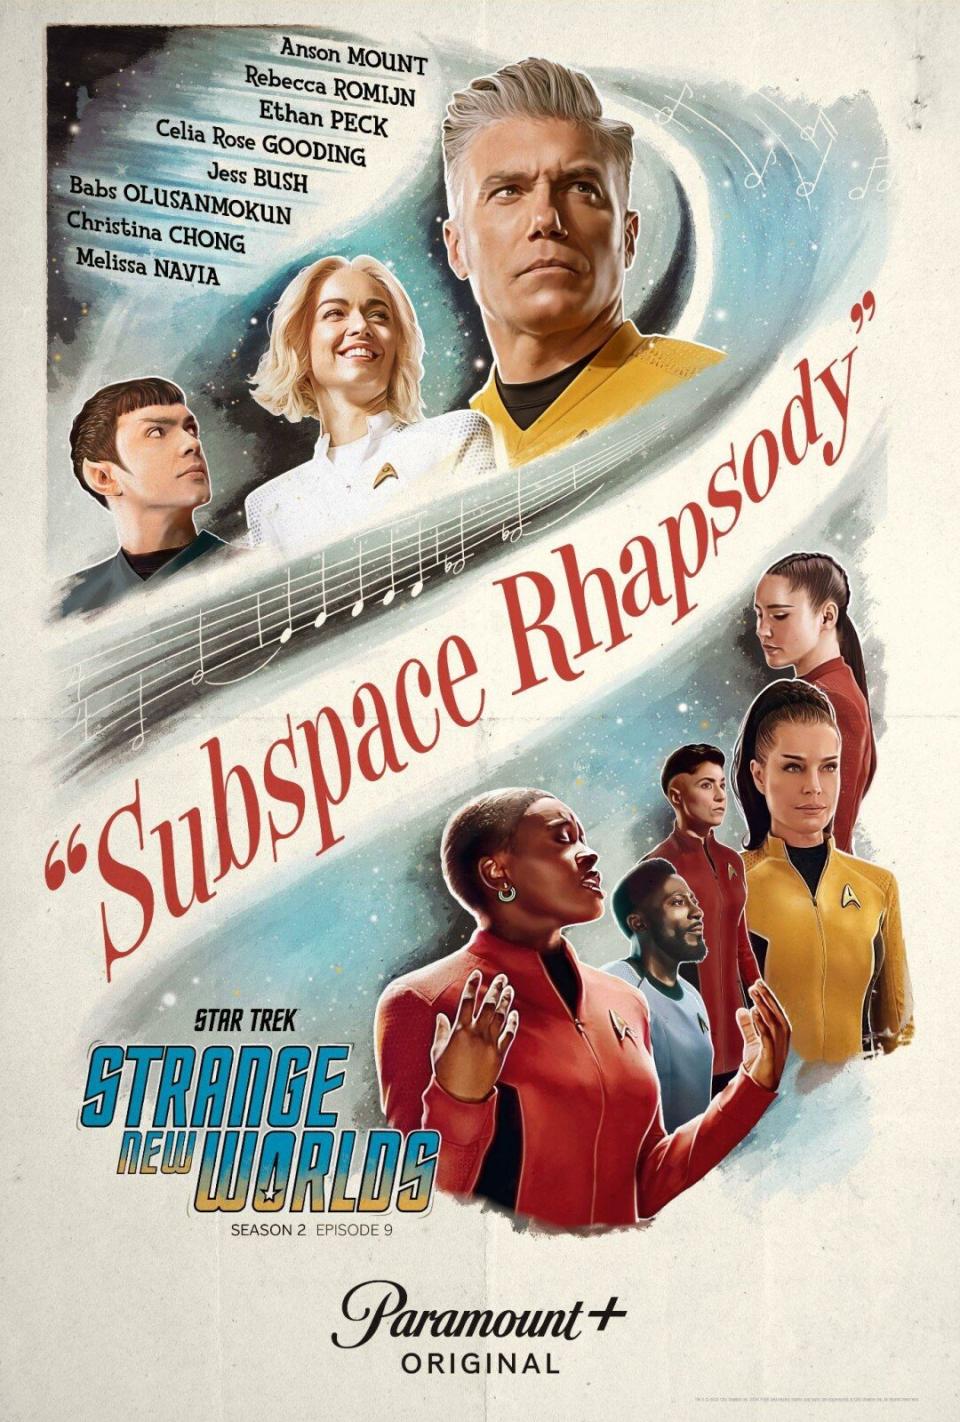 The Star Trek: Strange New Worlds musical episode poster shows all the crew members in painterly style